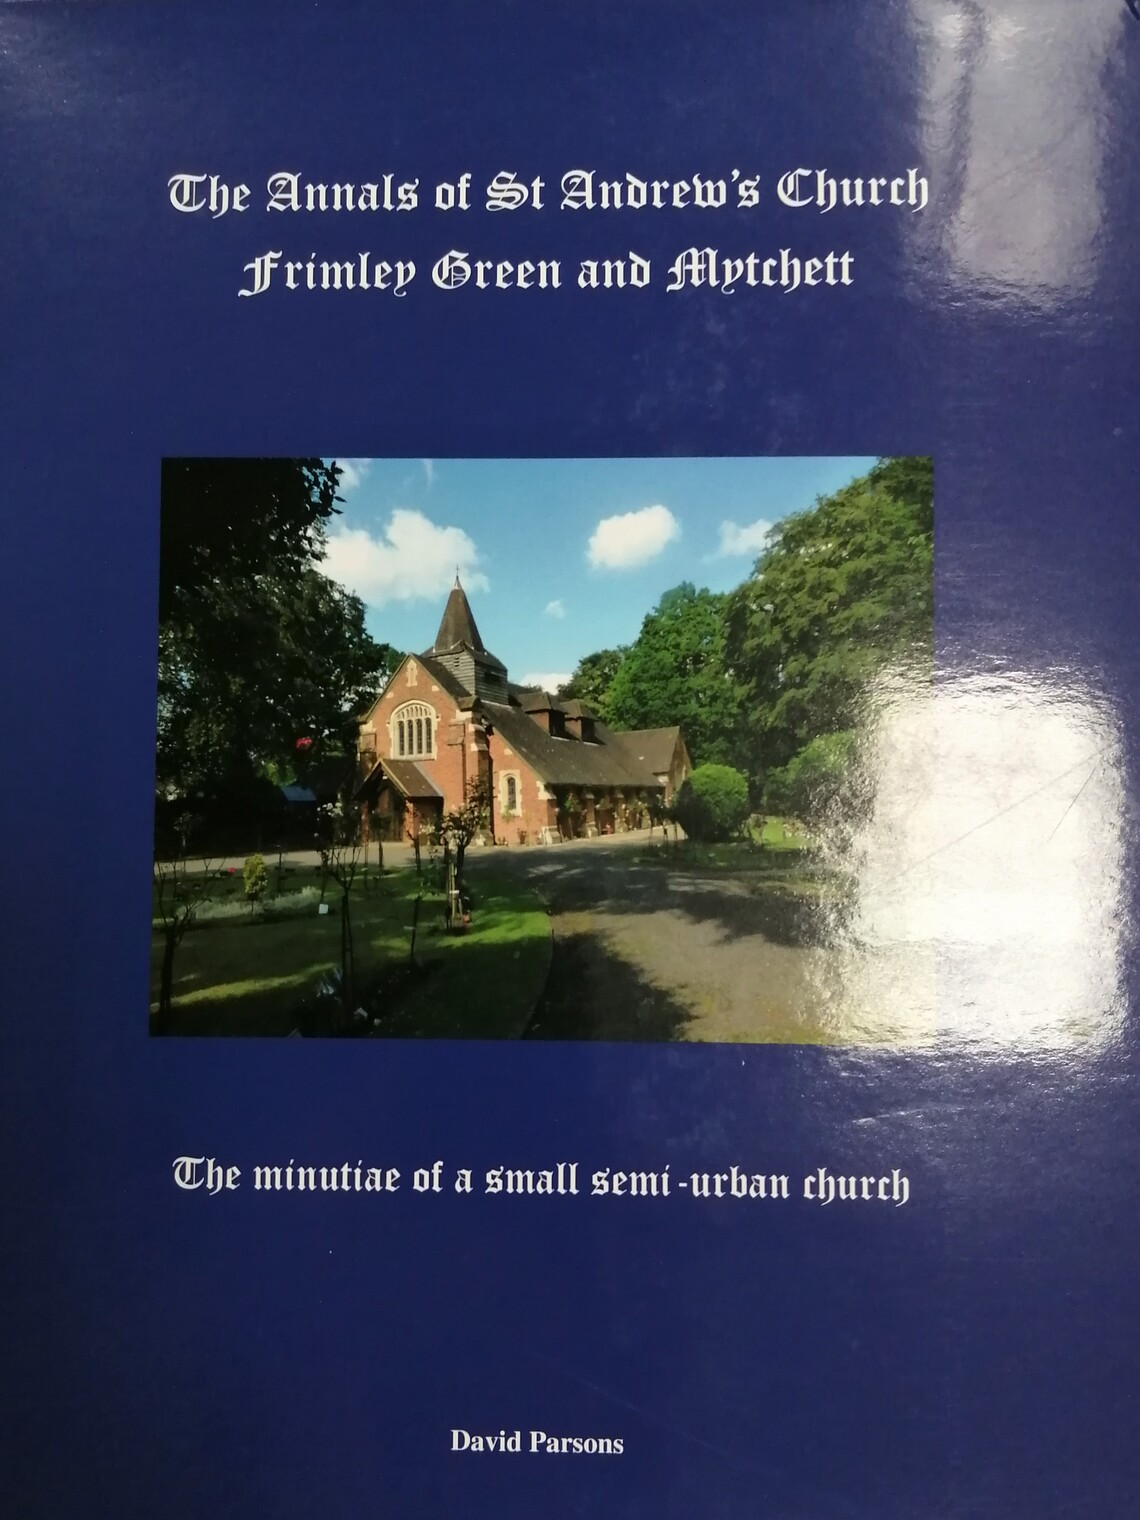 ANNALS OF ST ANDREWS CHURCH